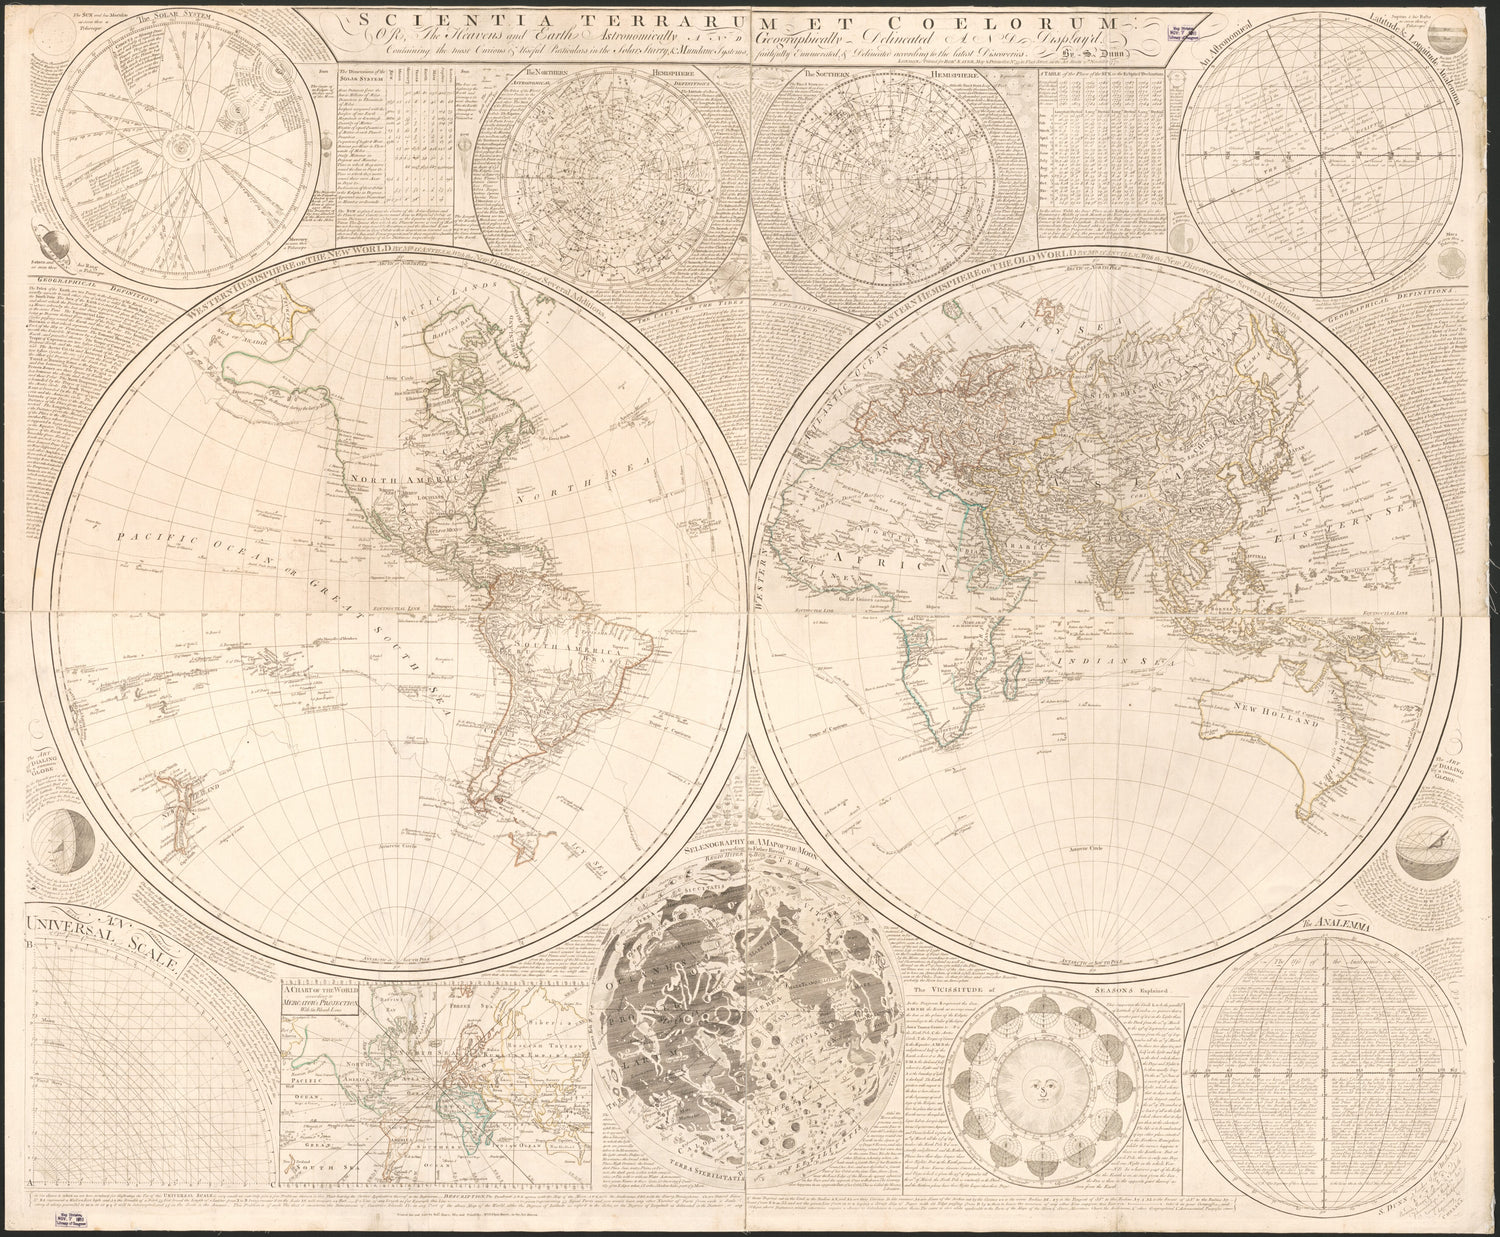 This old map of Scientia Terrarum Et Coelorum : Or, the Heavens and Earth Astronomically and Geographically Delineated and Display&